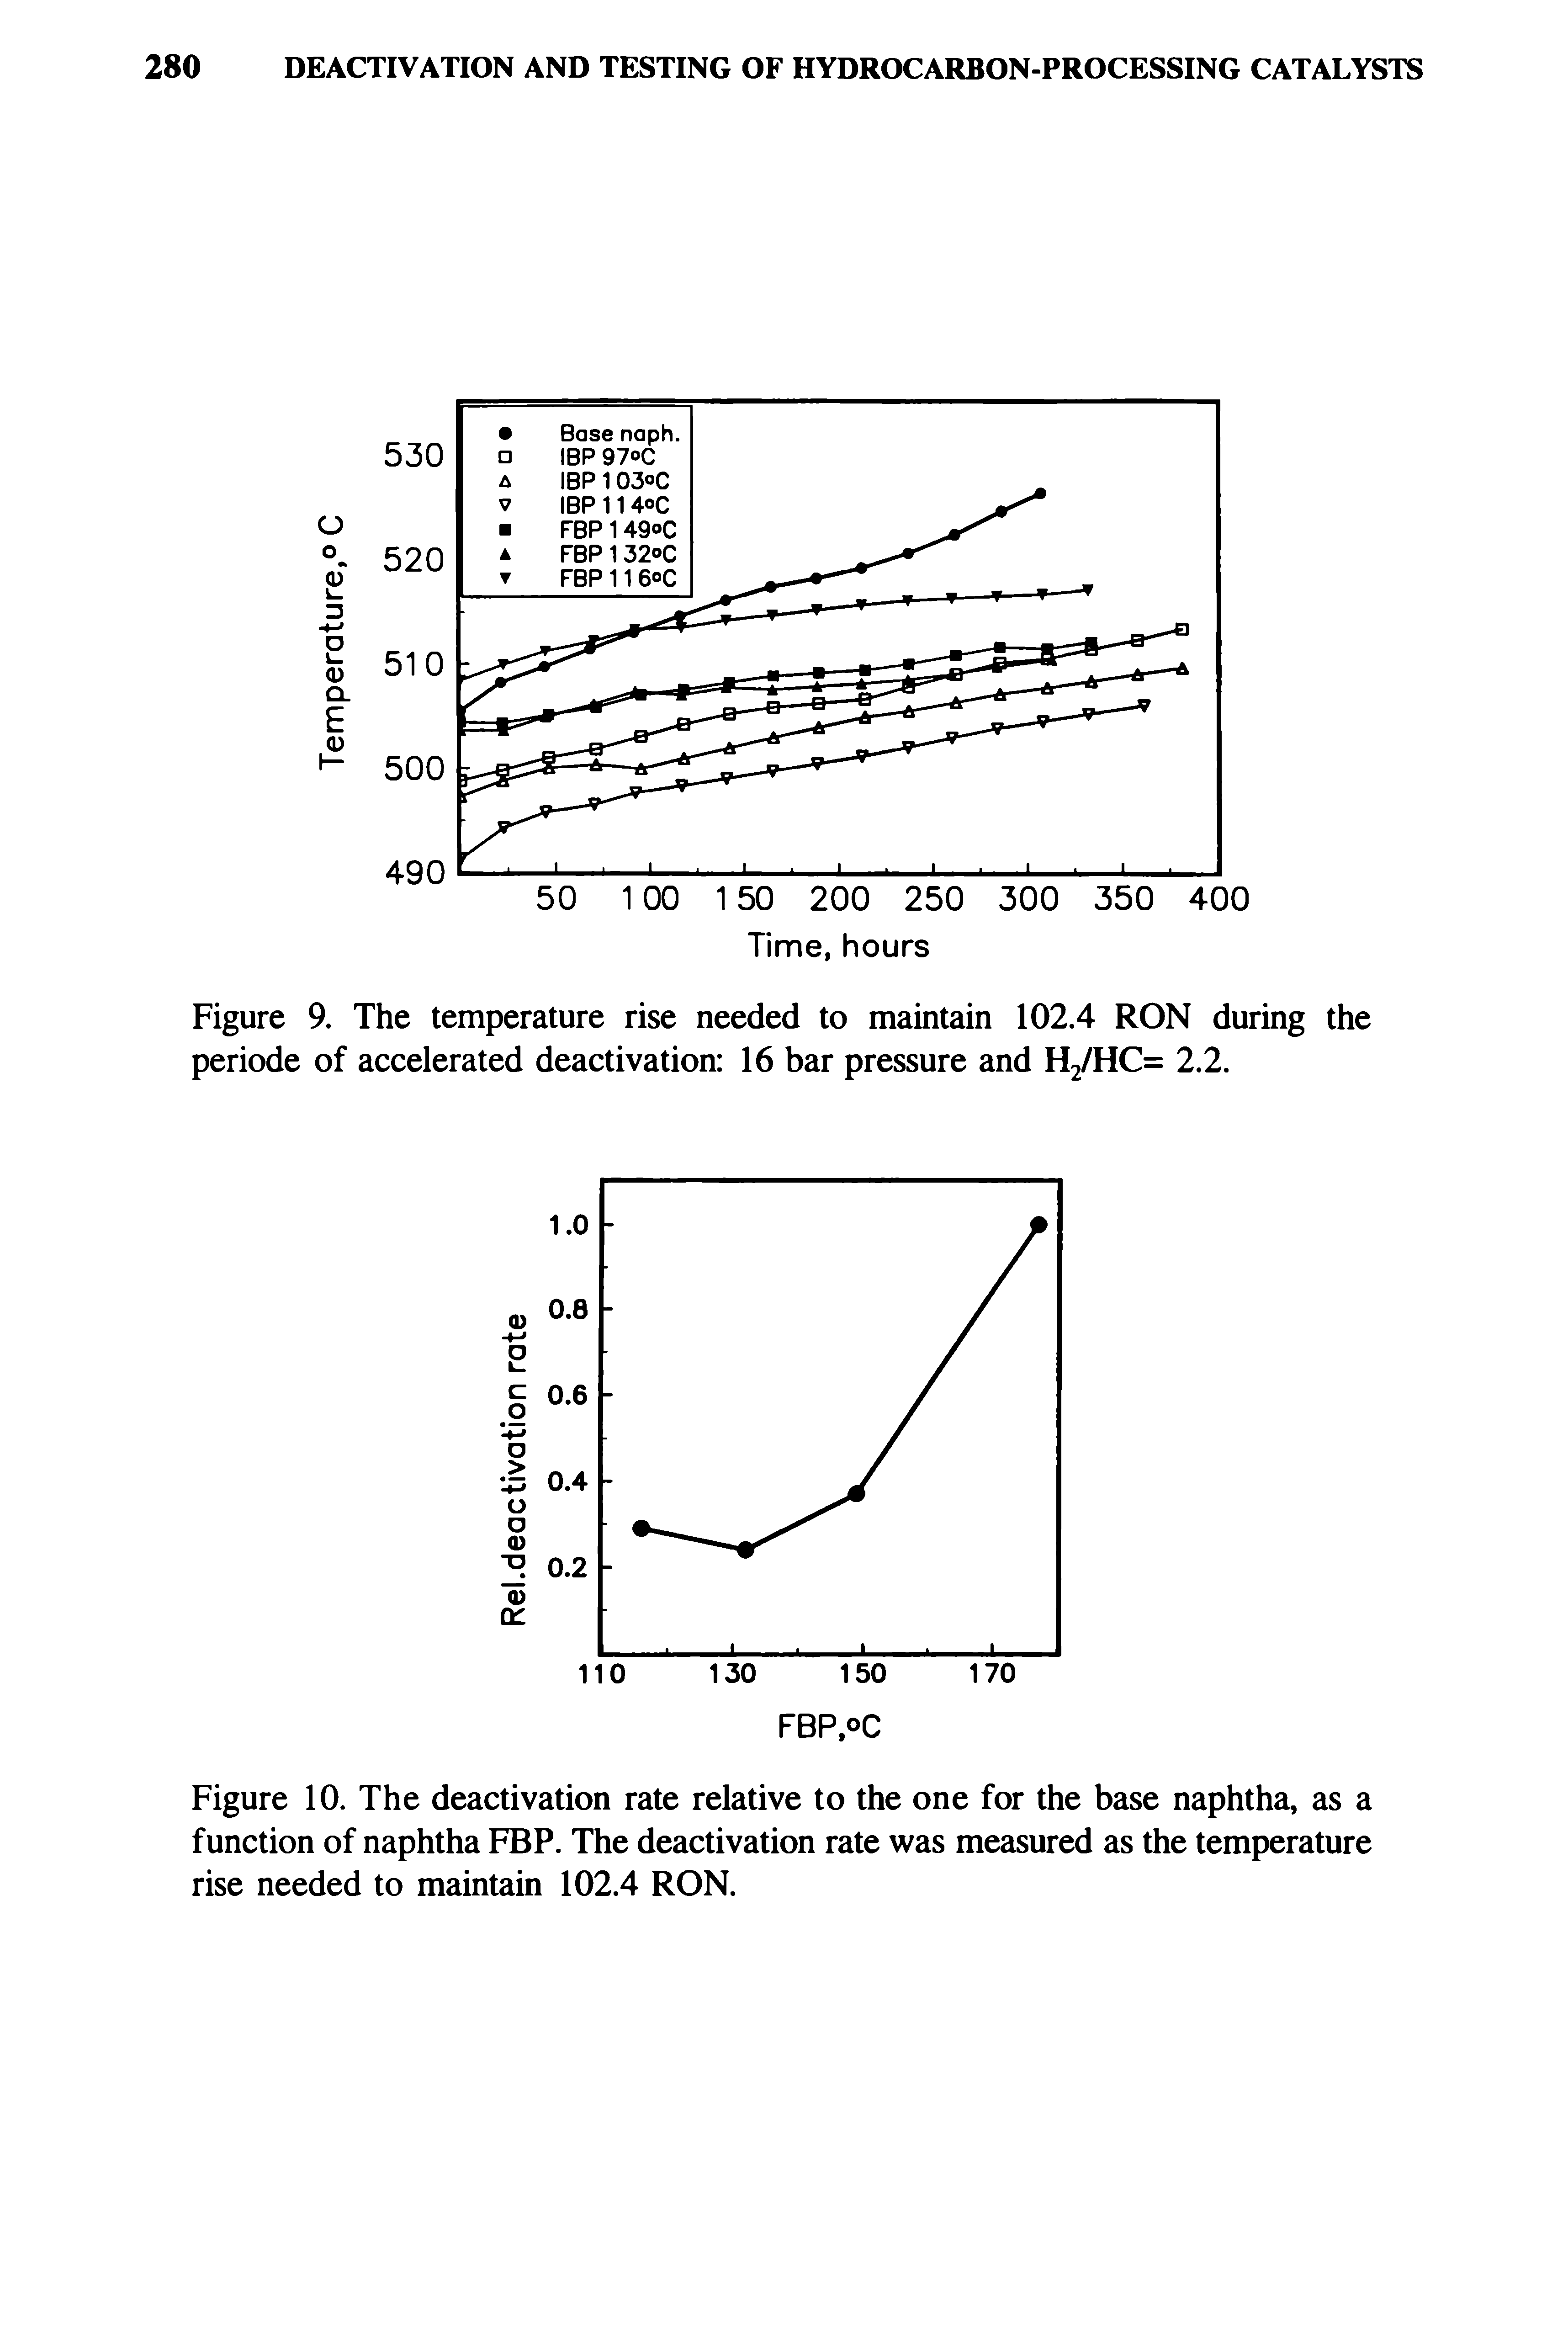 Figure 9. The temperature rise needed to maintain 102.4 RON during the periode of accelerated deactivation 16 bar pressure and H2/HC= 2.2.